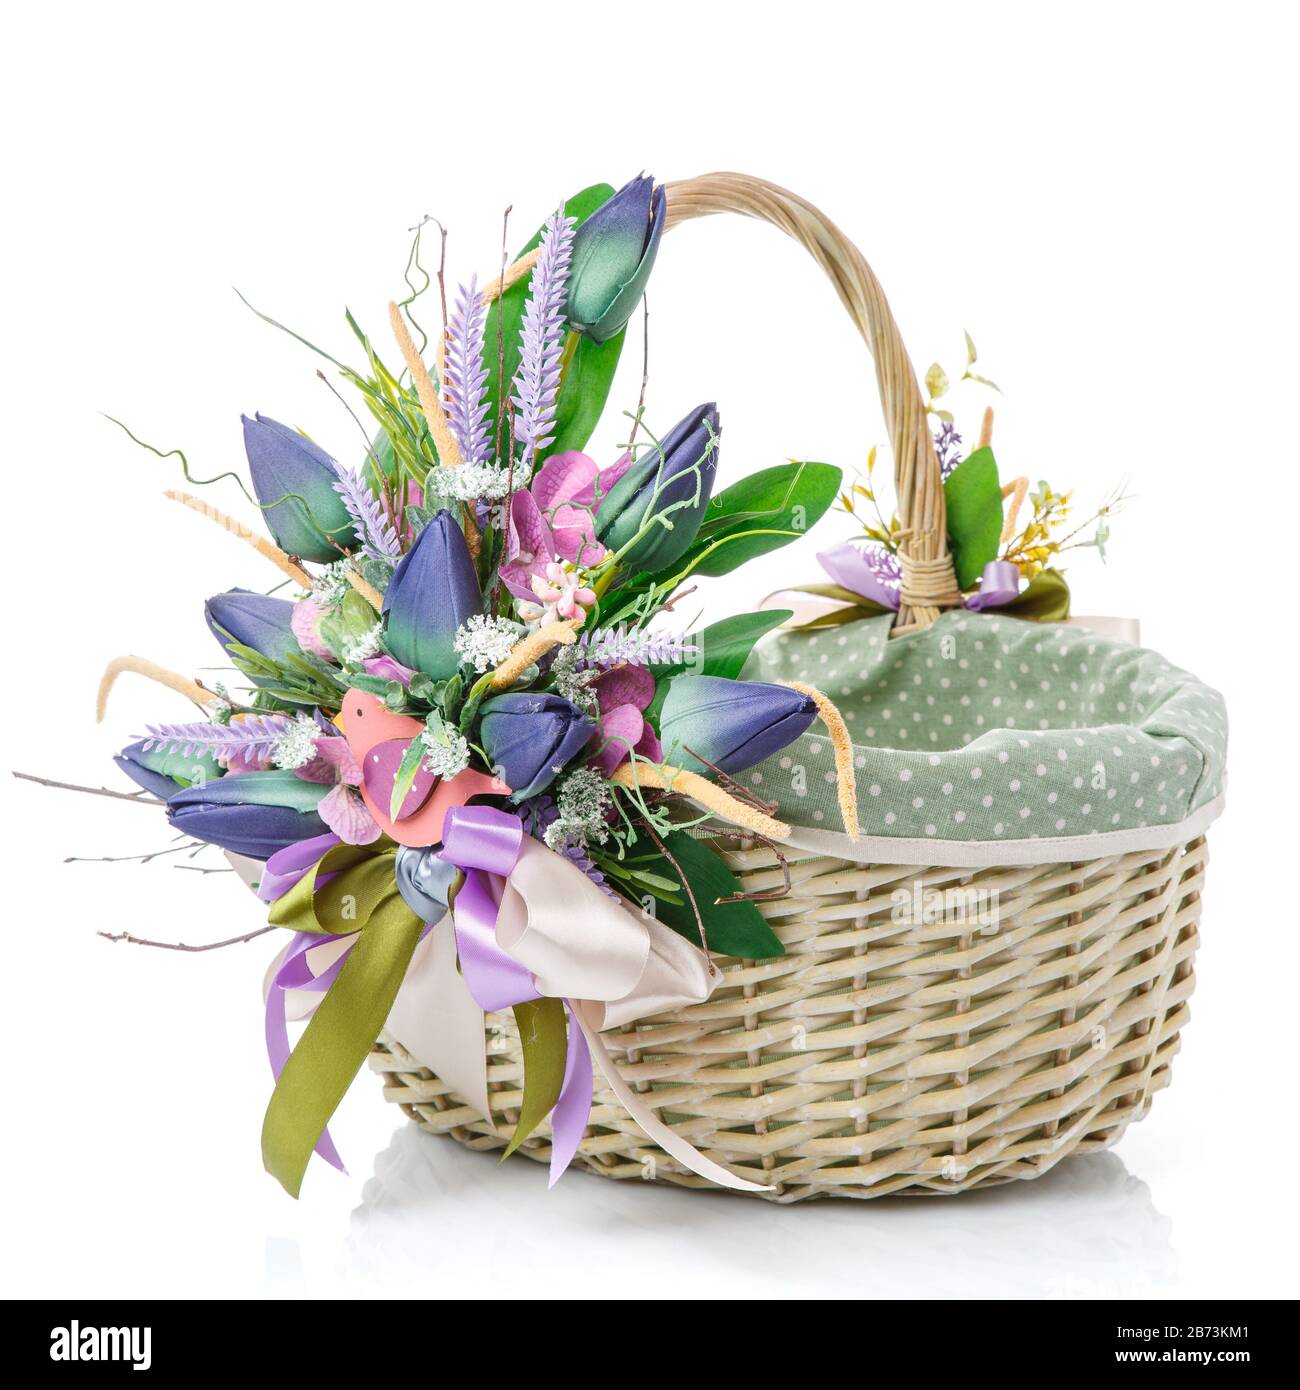 Easter basket with fabric inside on white background. Decorated with large decoration of blue tulips, greenery and decorative wooden bird. Stock Photo